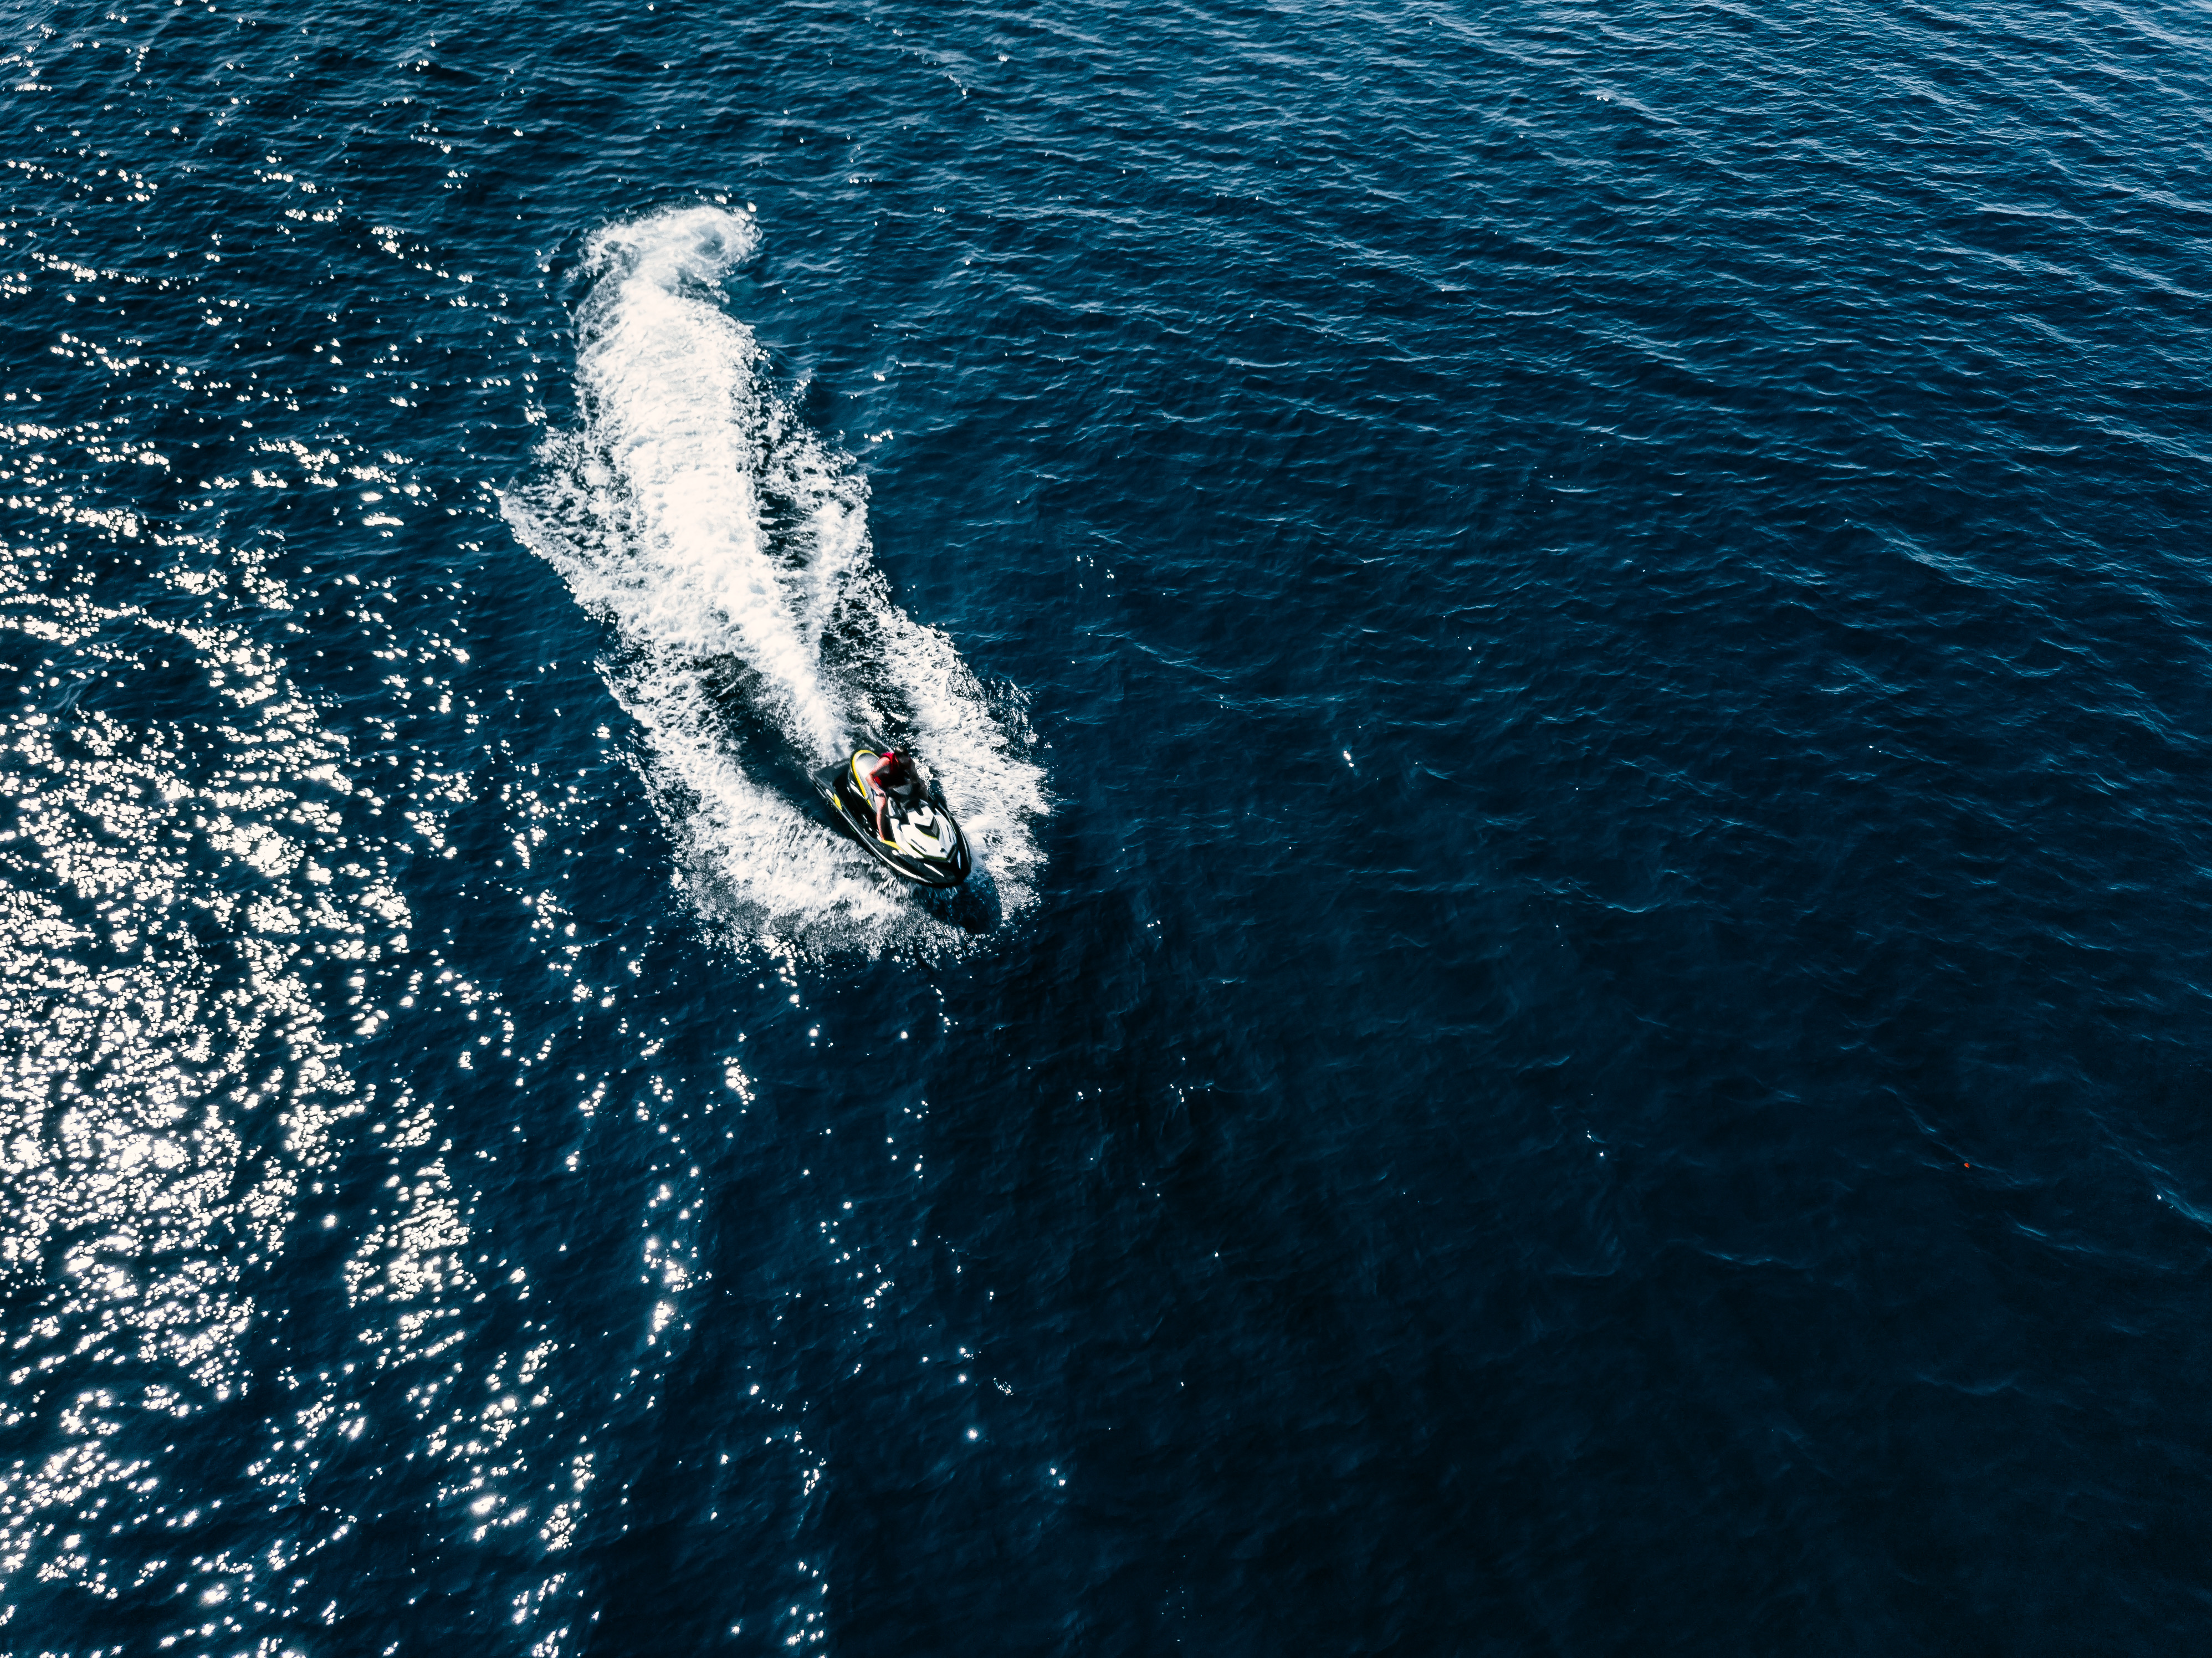 Aerial view of jet skier in blue sea. Jet ski in turquoise clear water racing